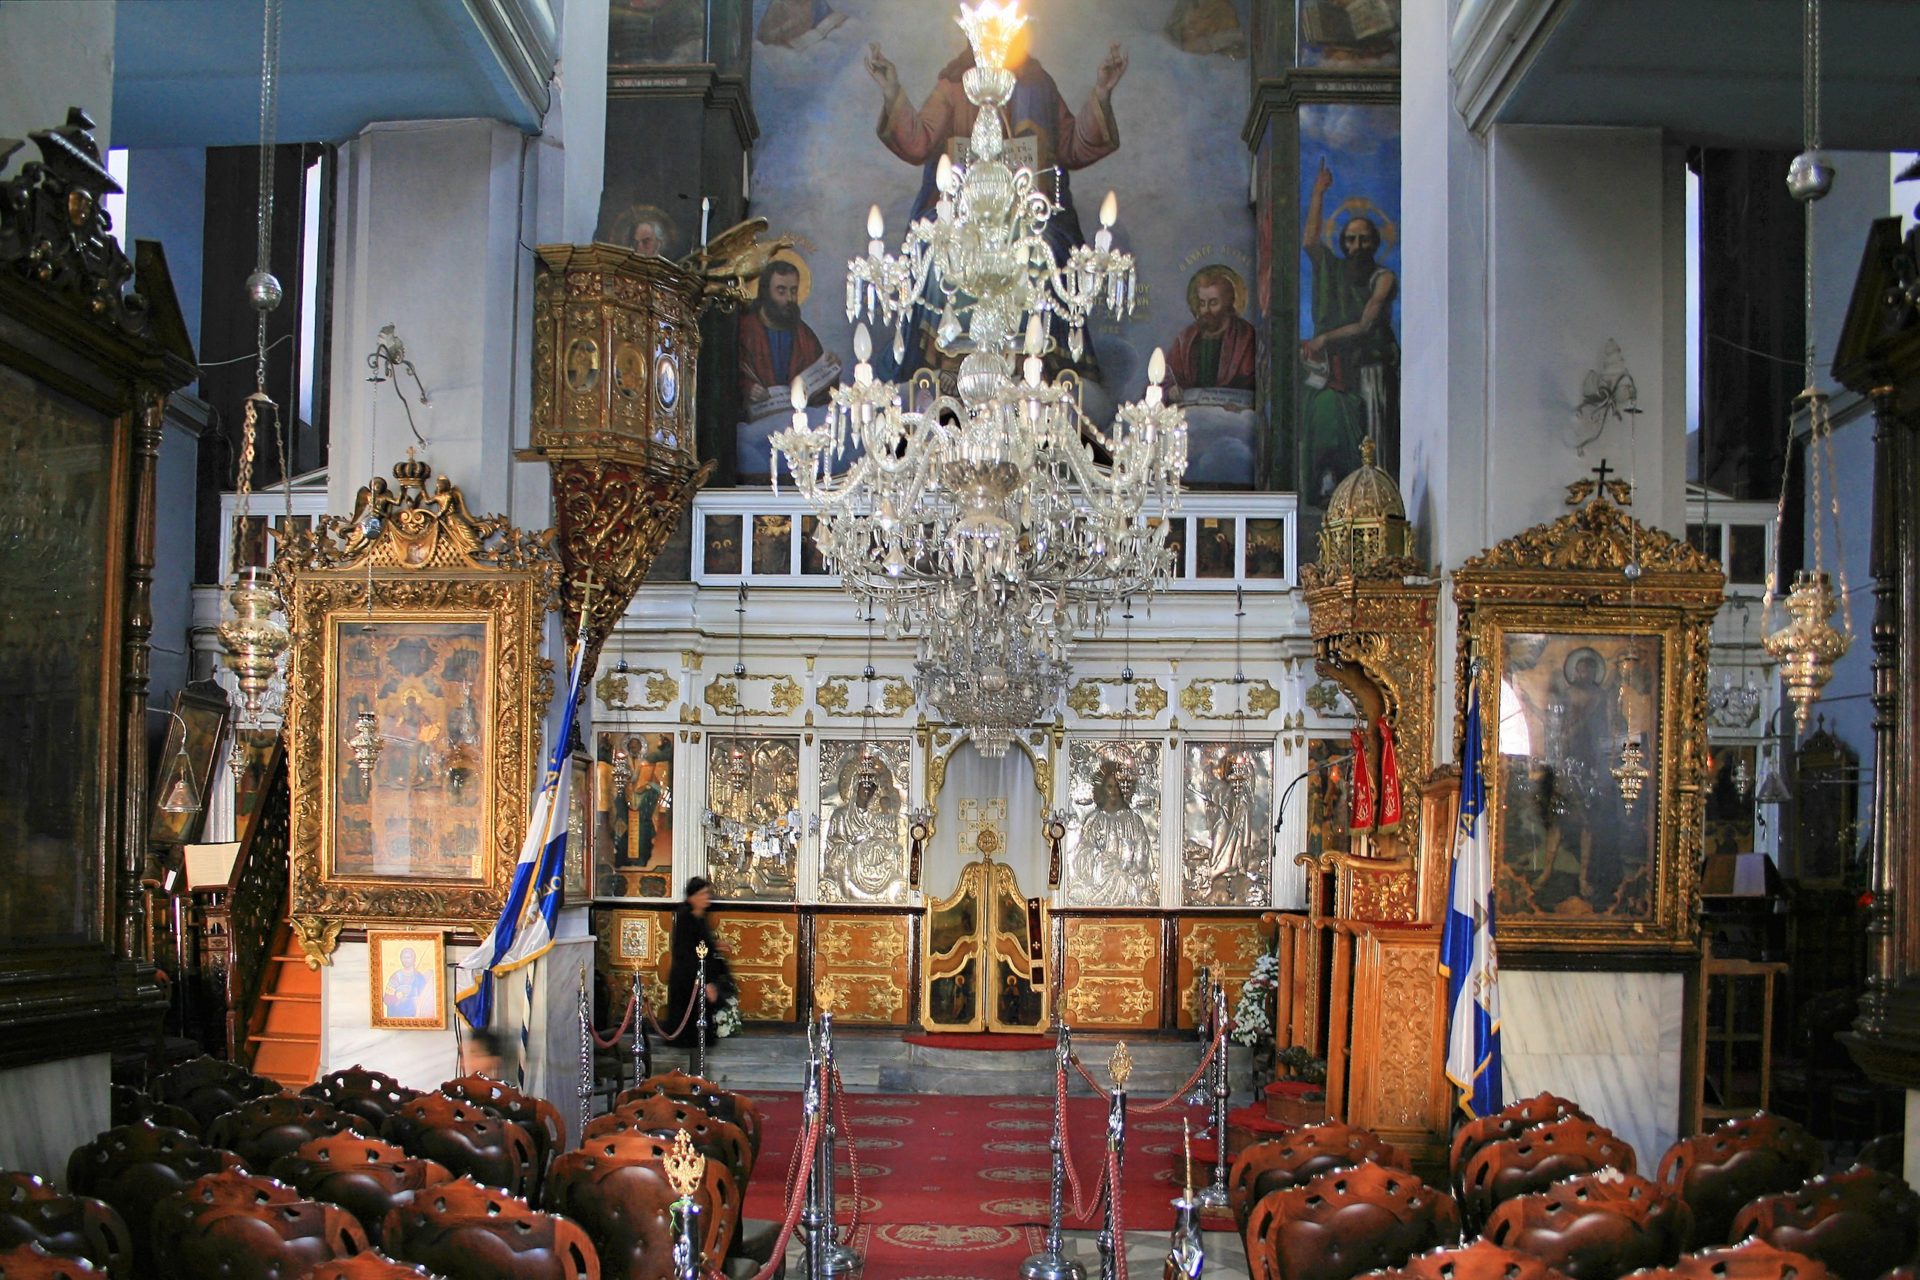 Photo https://upload.wikimedia.org/wikipedia/commons/9/9e/Chania_-_Greek_Orthodox_cathedral_indoor.jpg by Lapplaender. CC BY 2.0.